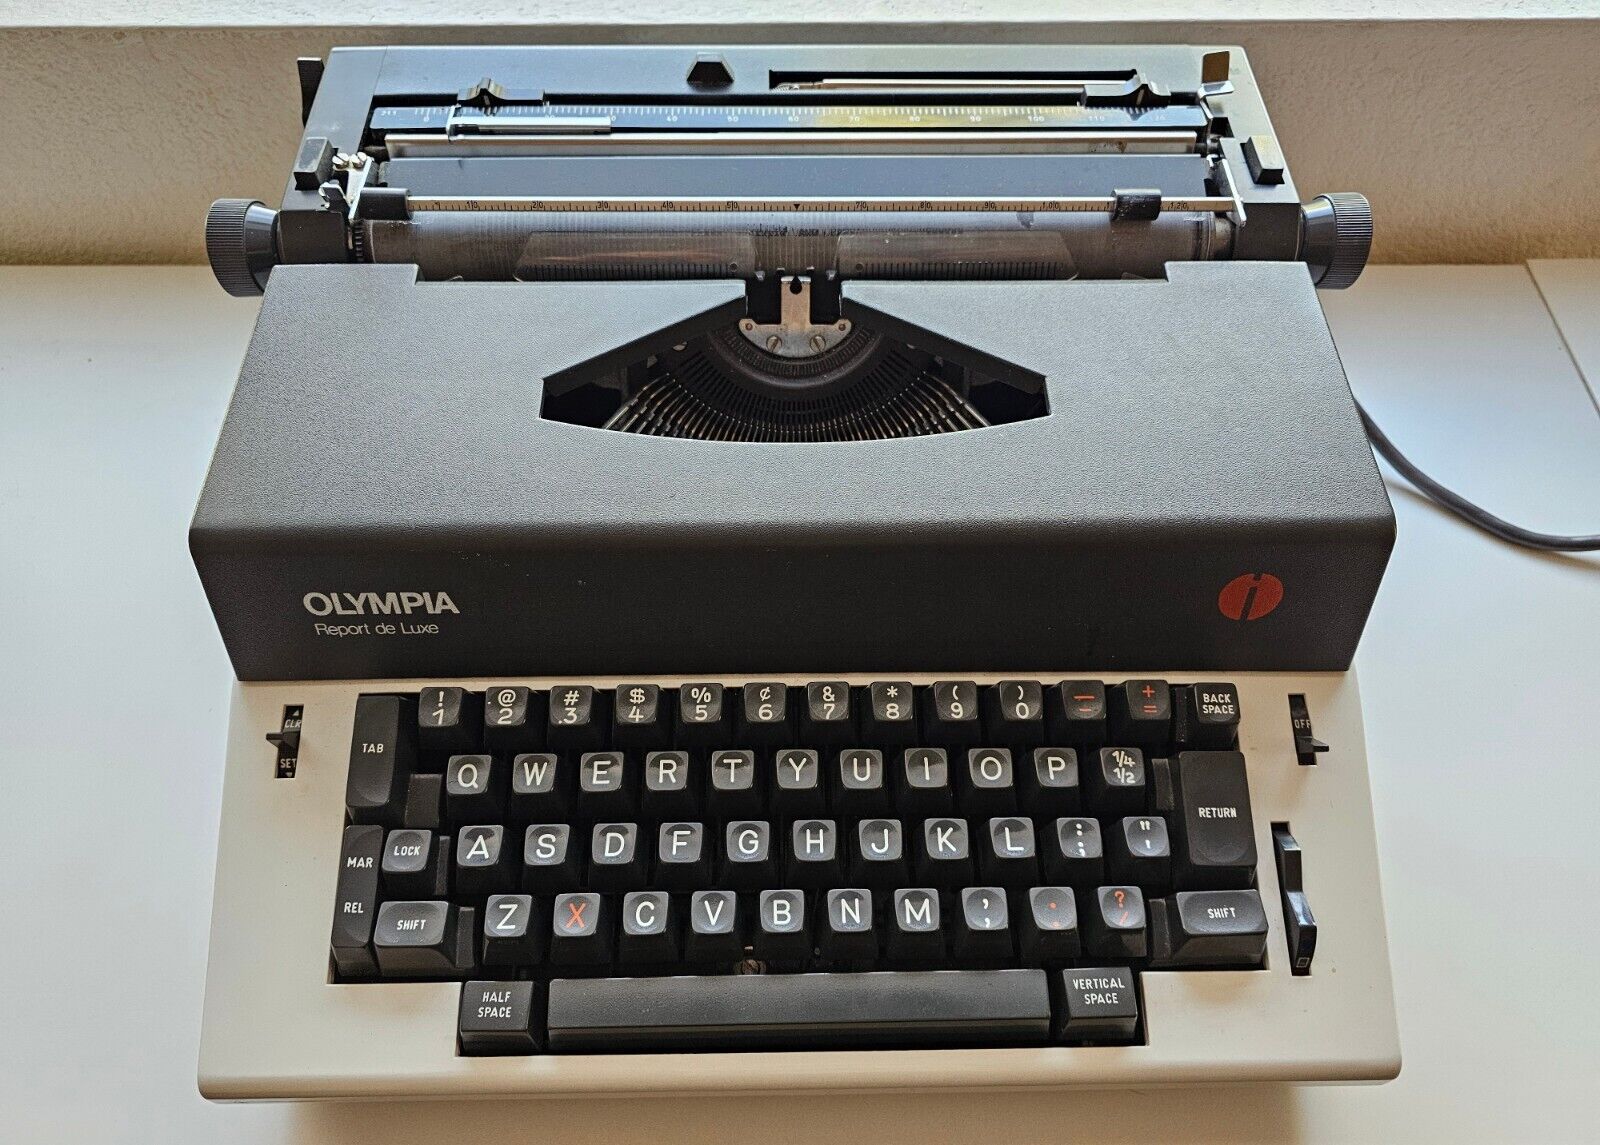  Vintage Olympia Report de Luxe Electric Typewriter 